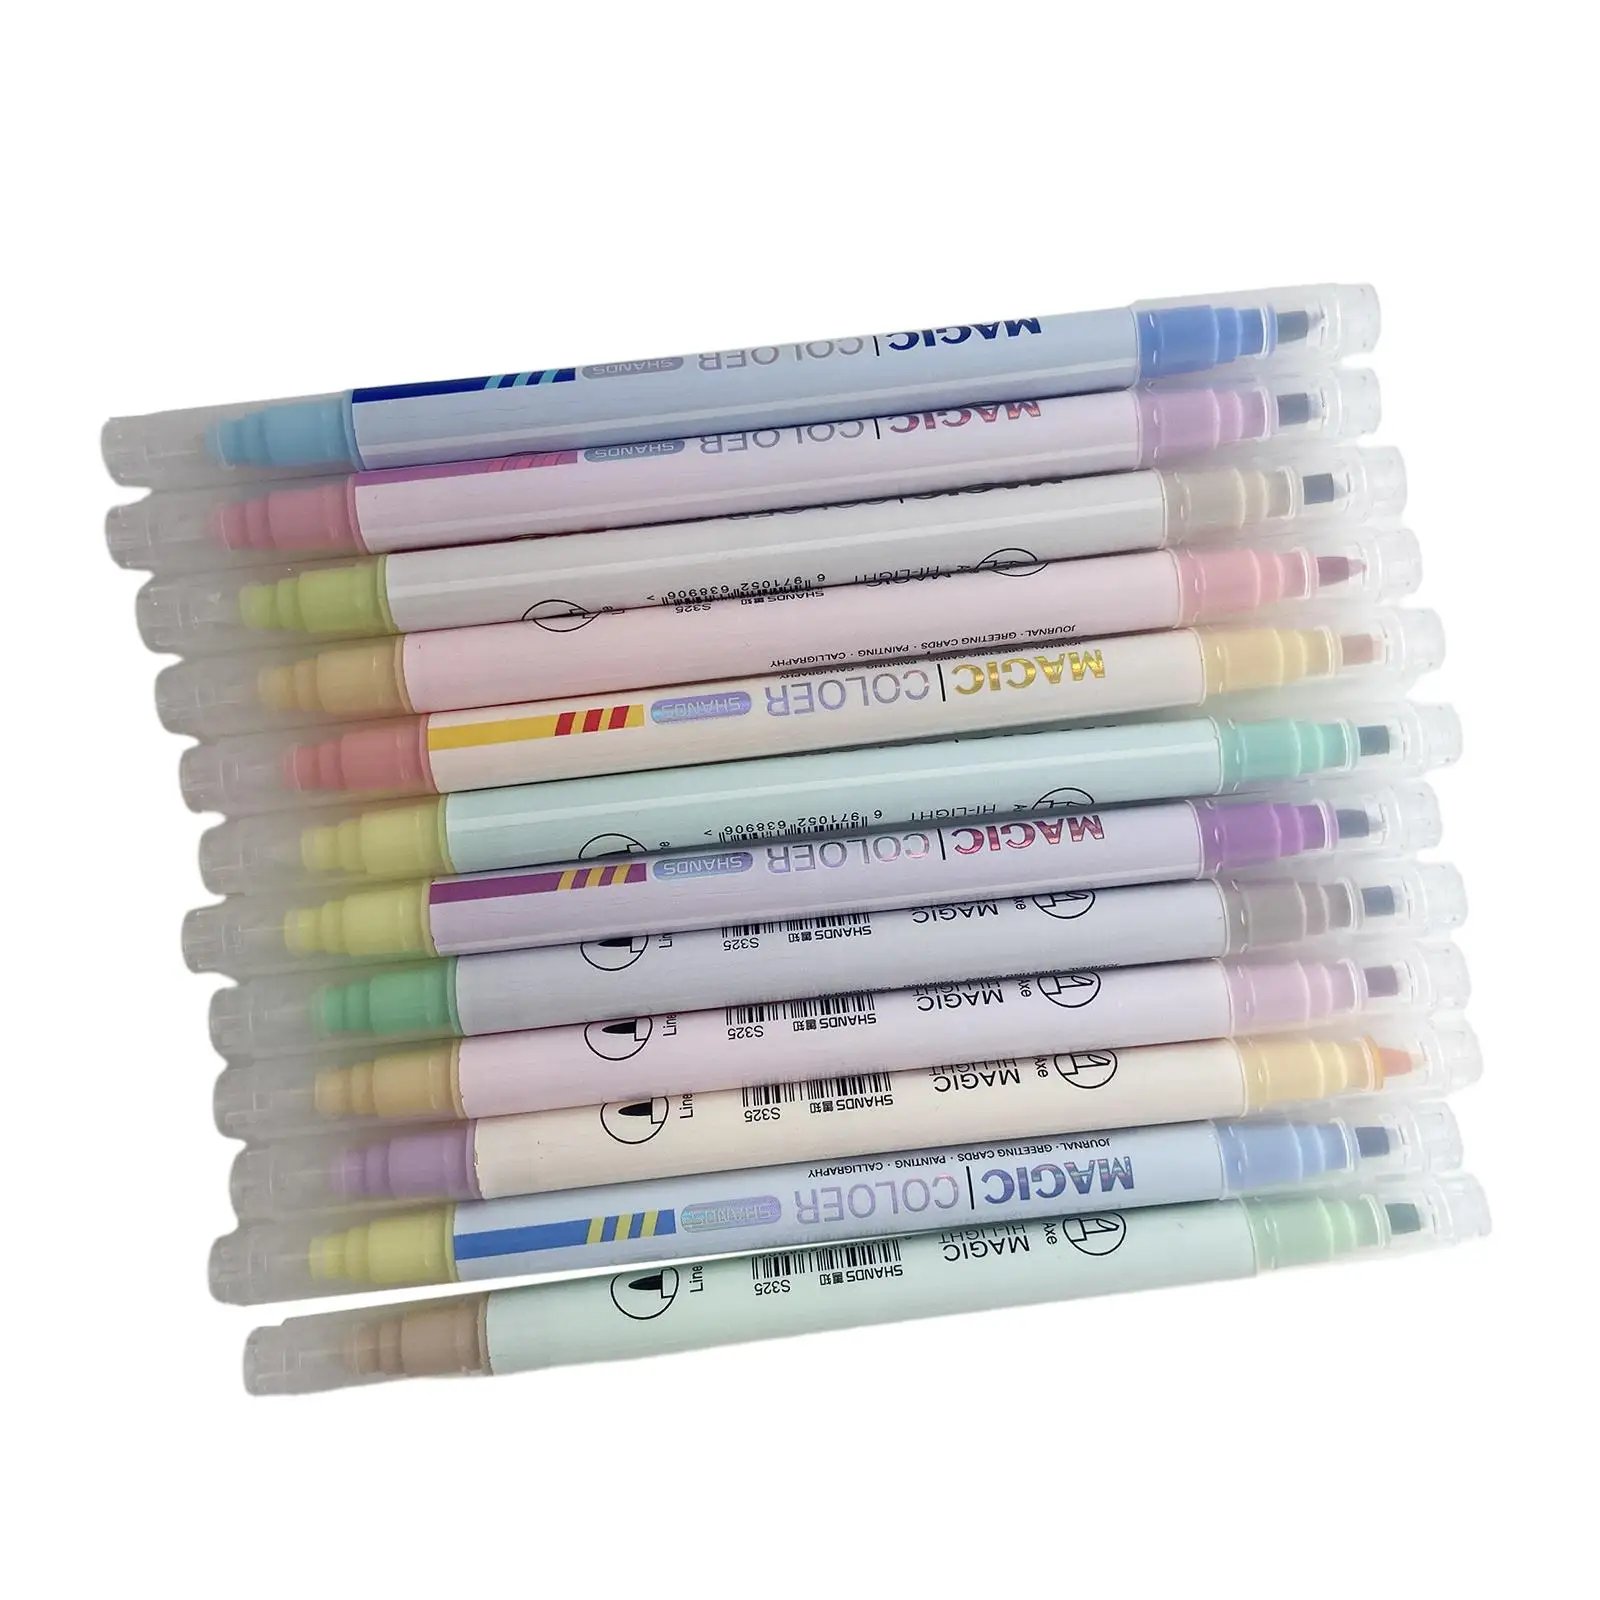 12 Pieces Marker Pens Highlighter Pens Art Markers for Paintings Journaling Writing Planner Scrapbooking Christmas Cards Drawing